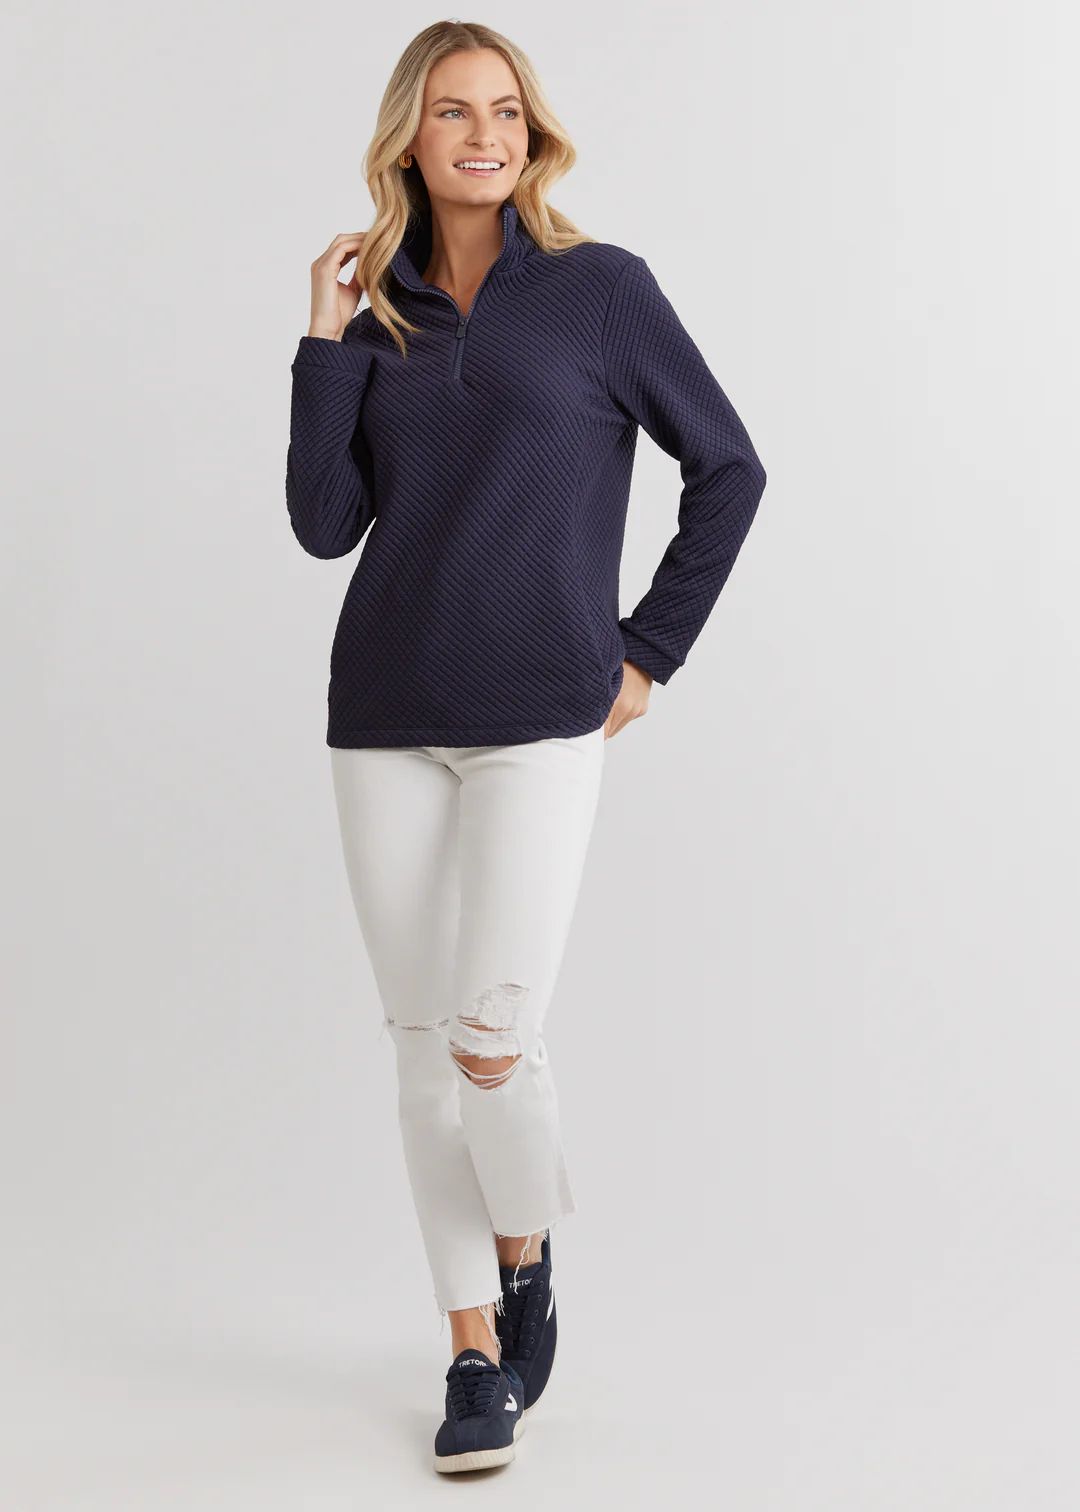 Pocomo Pullover in Waffle (Navy) | Dudley Stephens